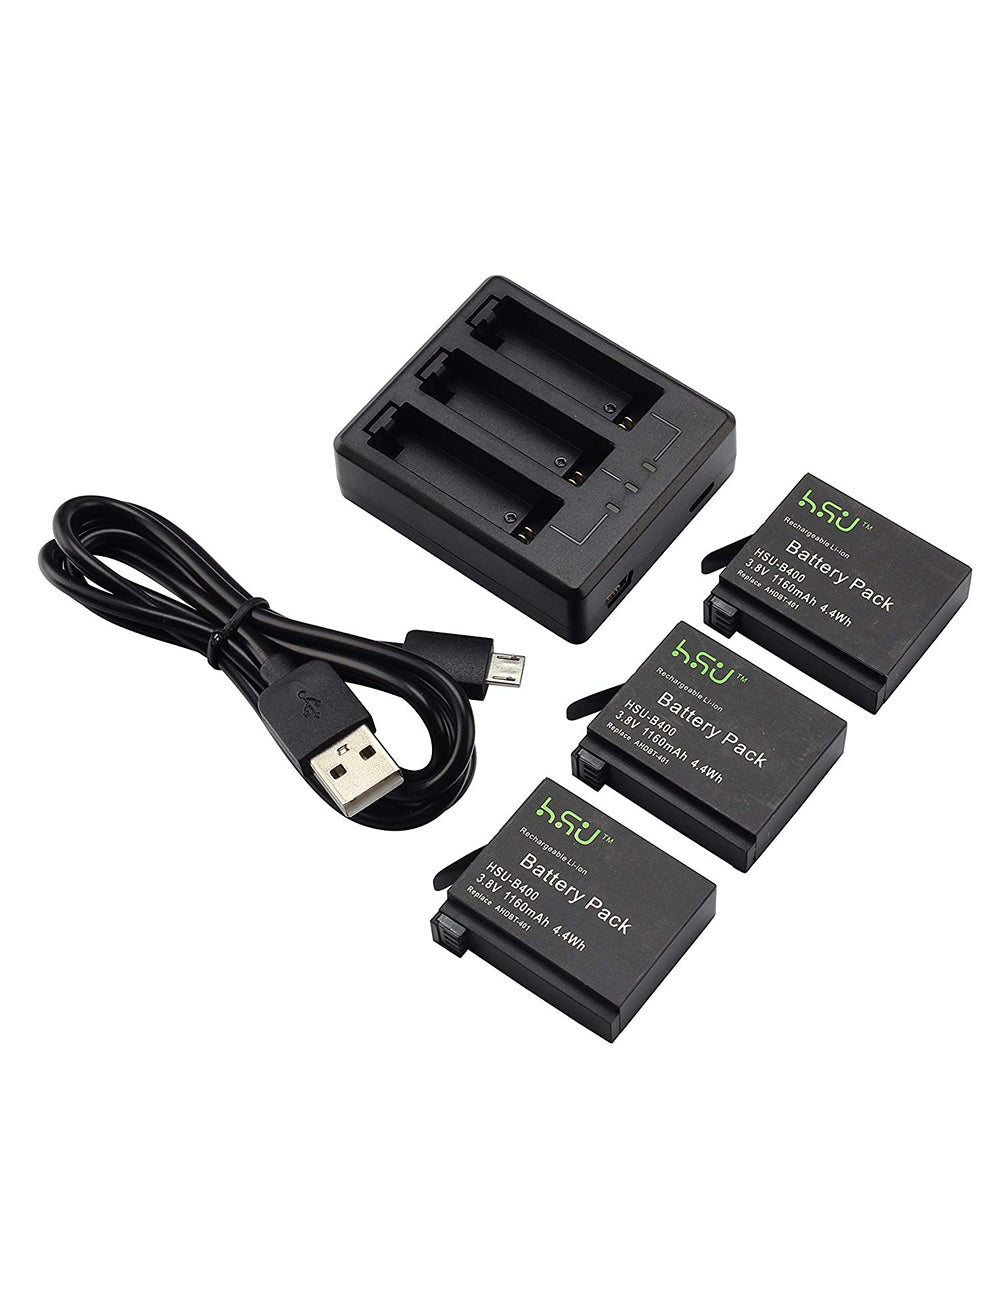 Hsu Rechargeable Battery And Triple Charger For Gopro Hero 4 Silver Hsushop